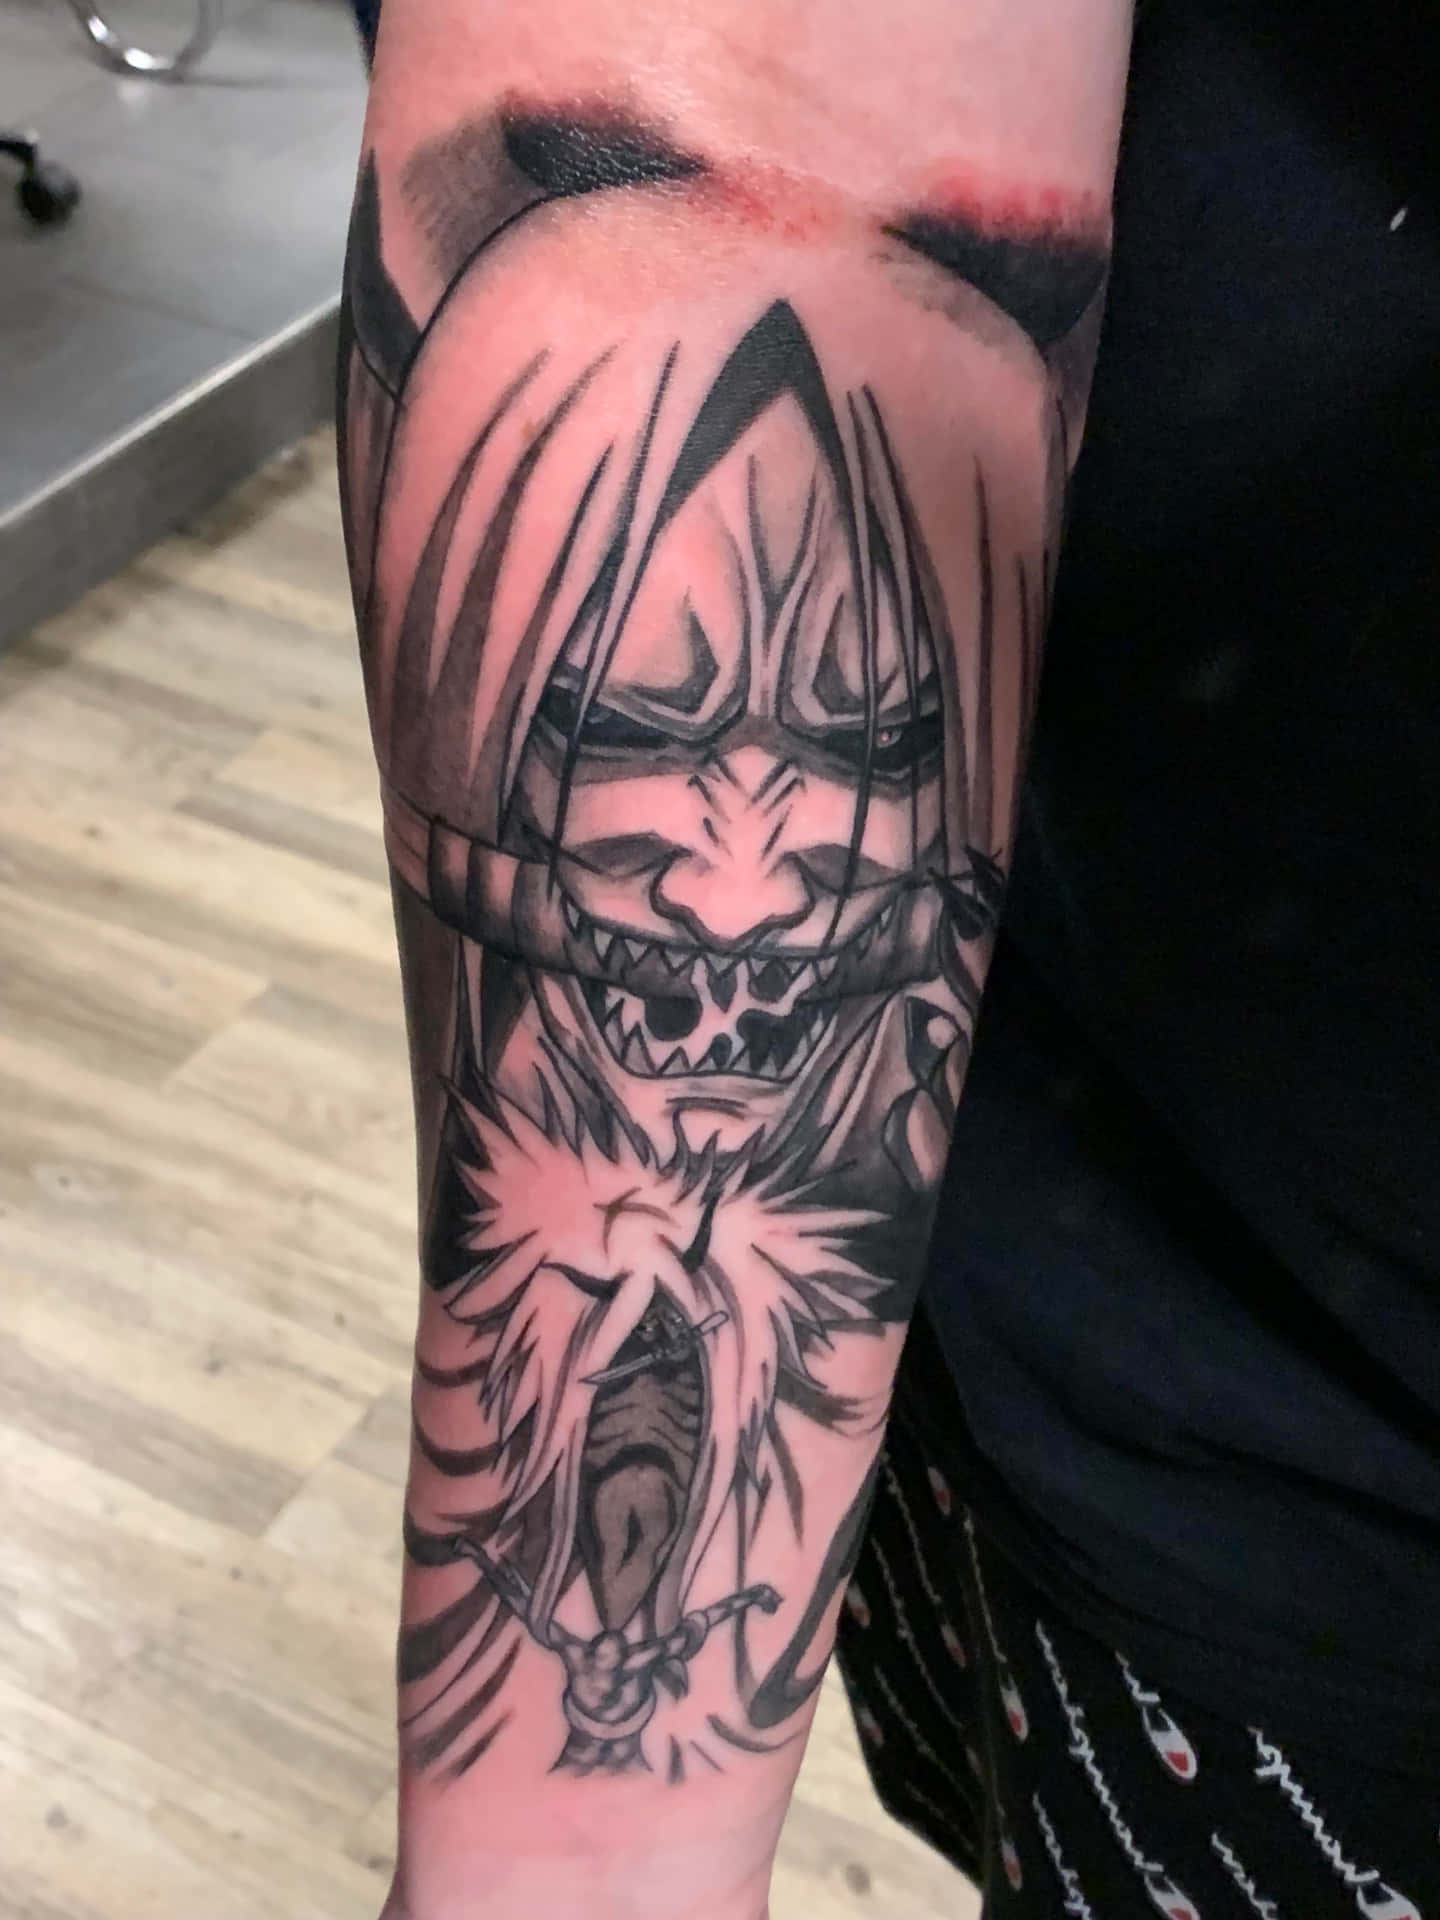 Just wanted to show off my newly finished reaper death seal tattoo  r Naruto